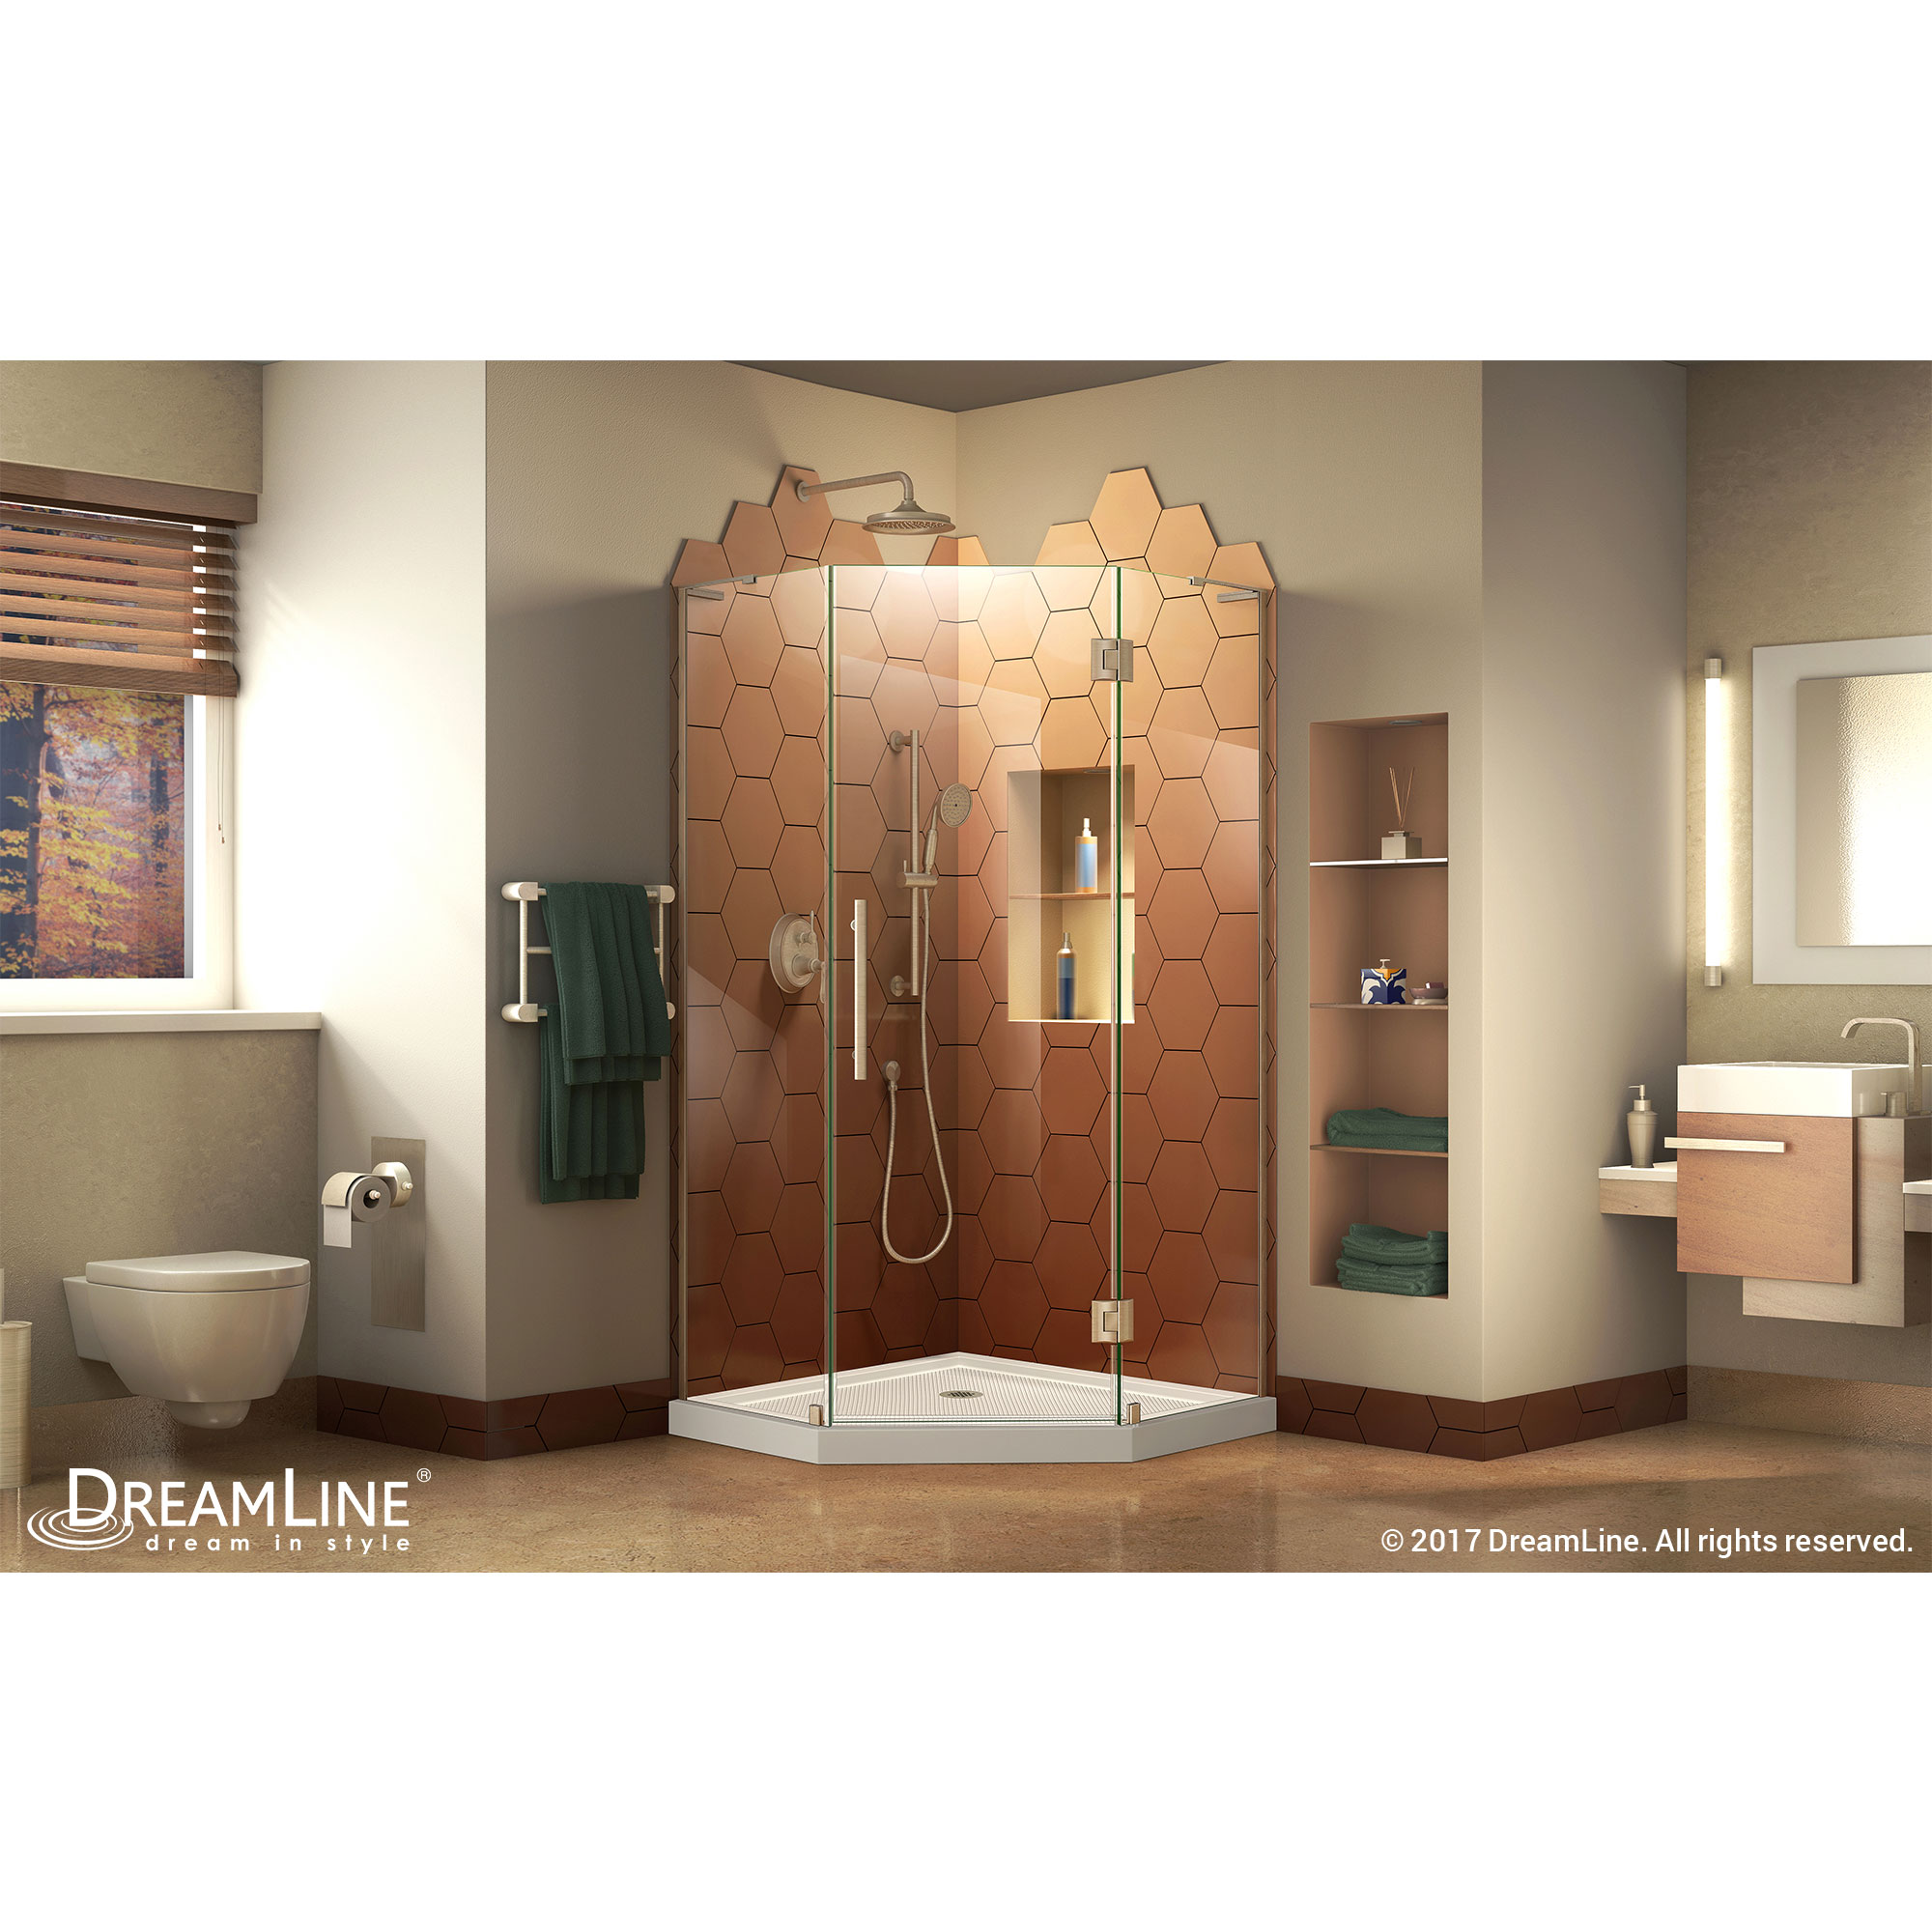 DreamLine Prism Plus 36 in. D x 36 in. W x 74 3/4 in. H Hinged Shower Enclosure in Brushed Nickel with Corner Drain White Base